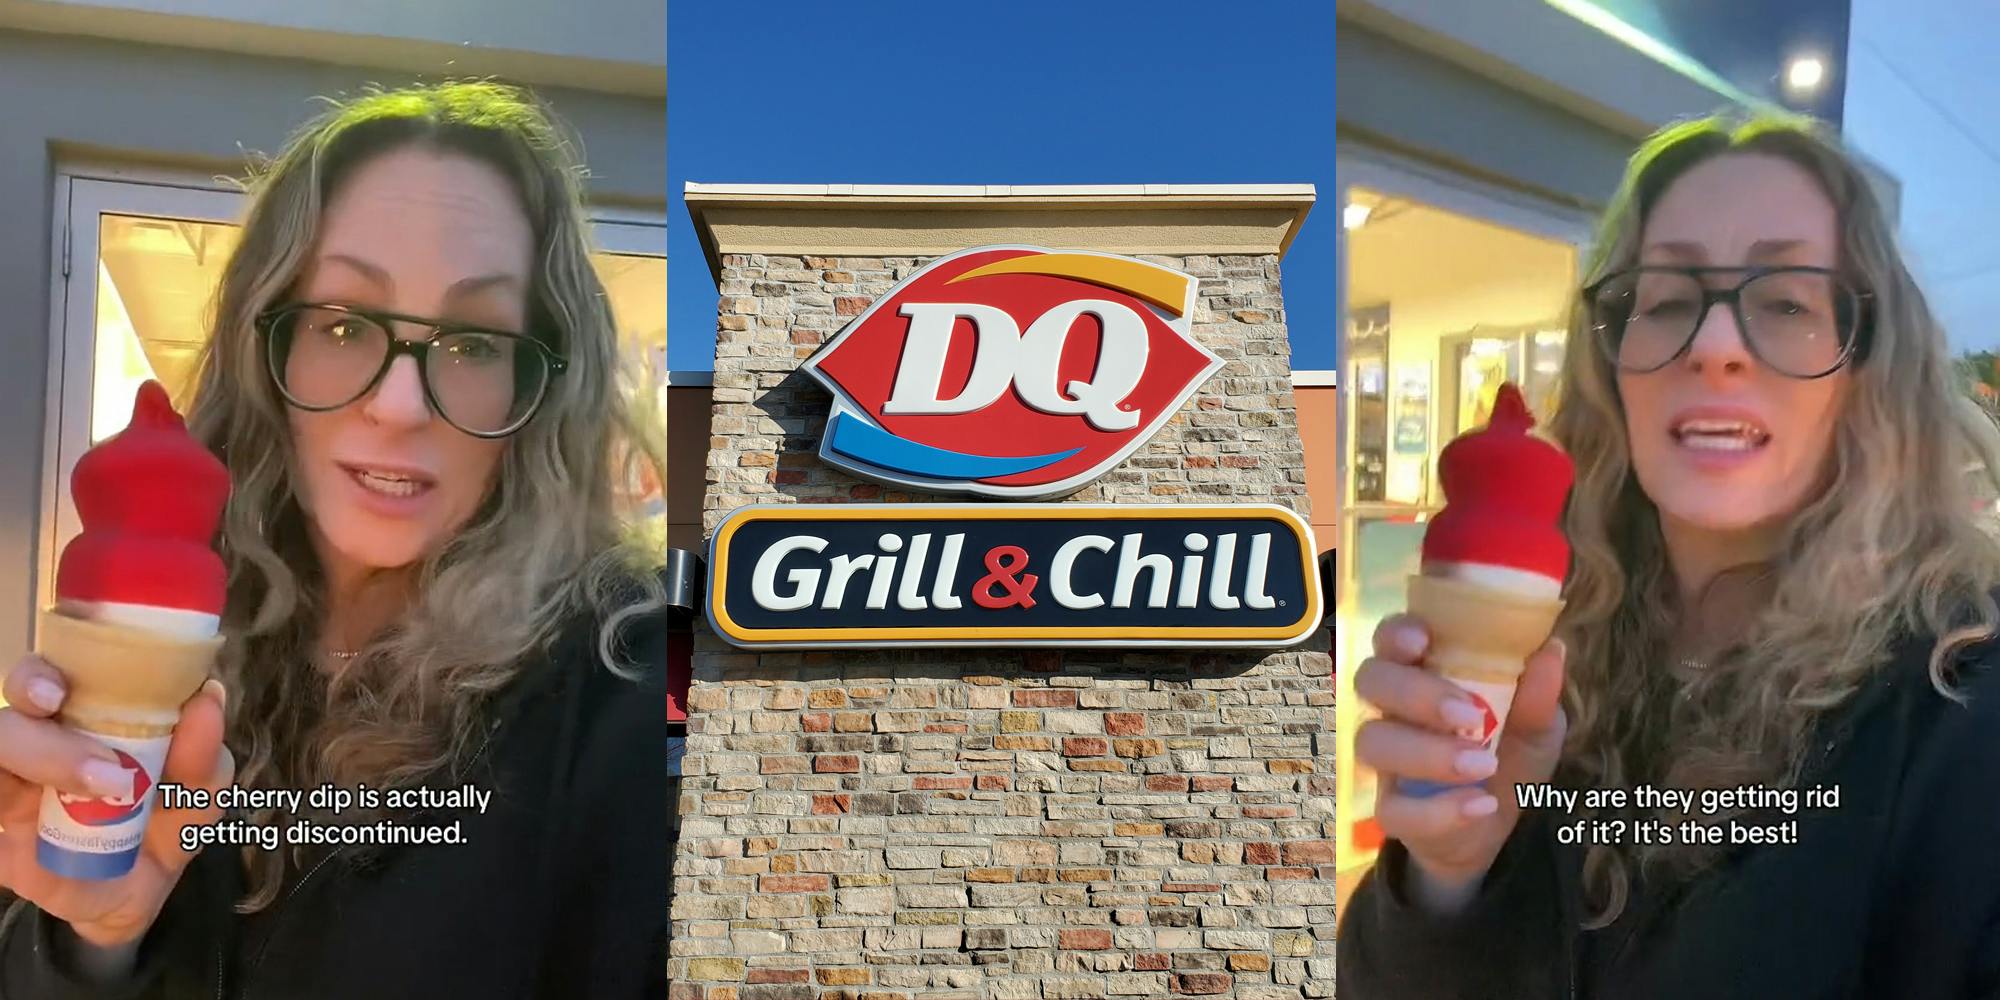 DQ customer speaking while holding cherry dipped ice cream with caption "The cherry dip is actually getting discontinued." (l) Dairy Queen building with sign (c) DQ customer speaking while holding cherry dipped ice cream with caption "Why are they getting rid of it? It's the best!" (r)